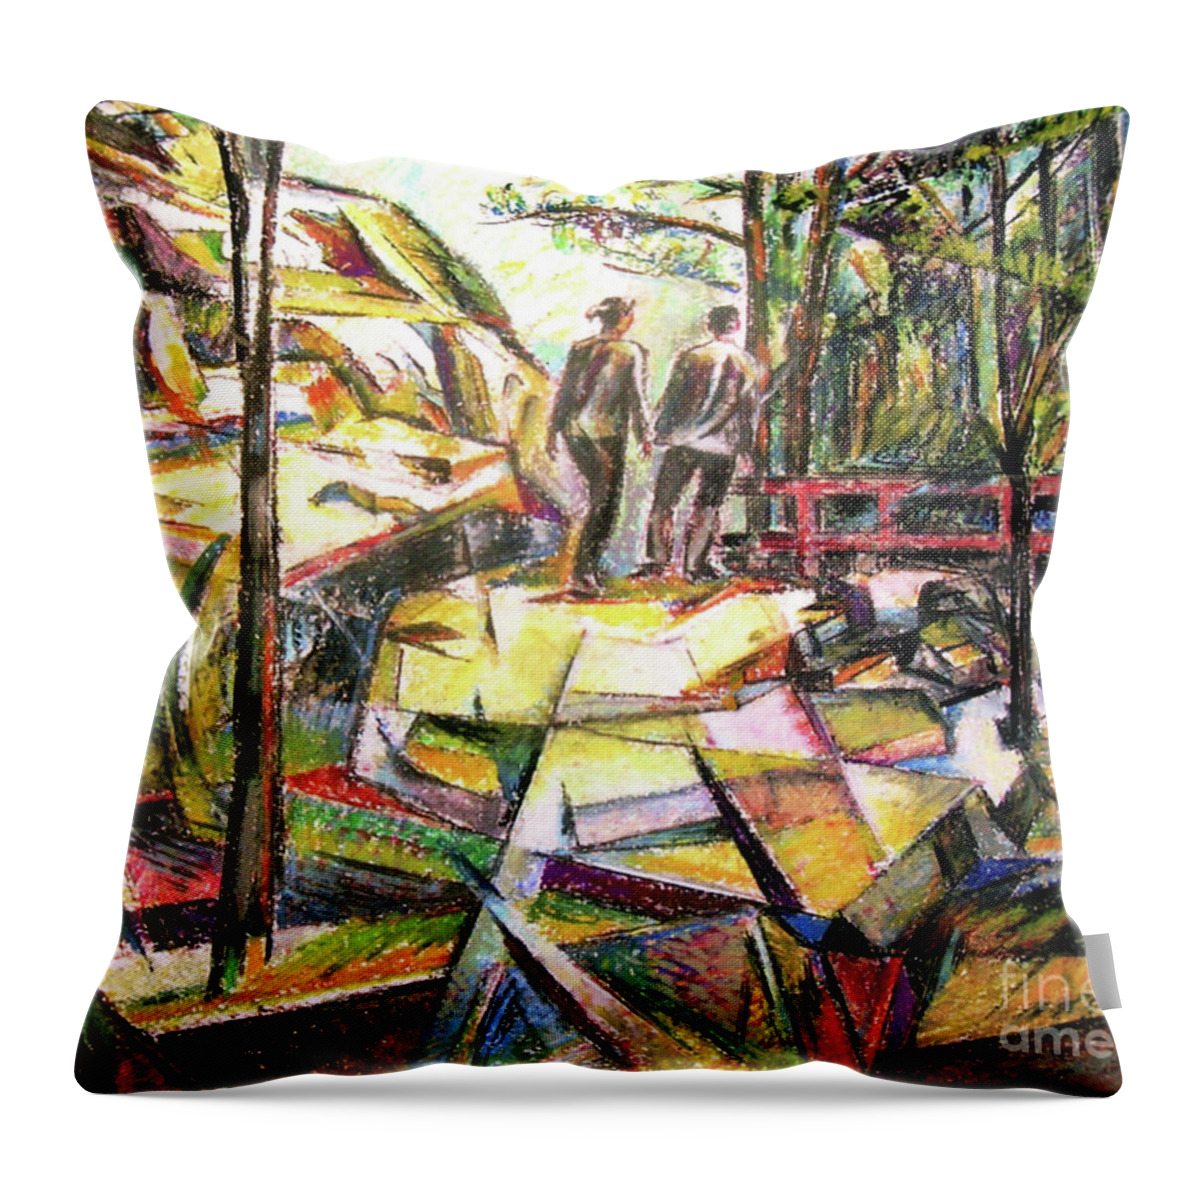 Landscape Throw Pillow featuring the drawing Abstract Landscape With People by Stan Esson